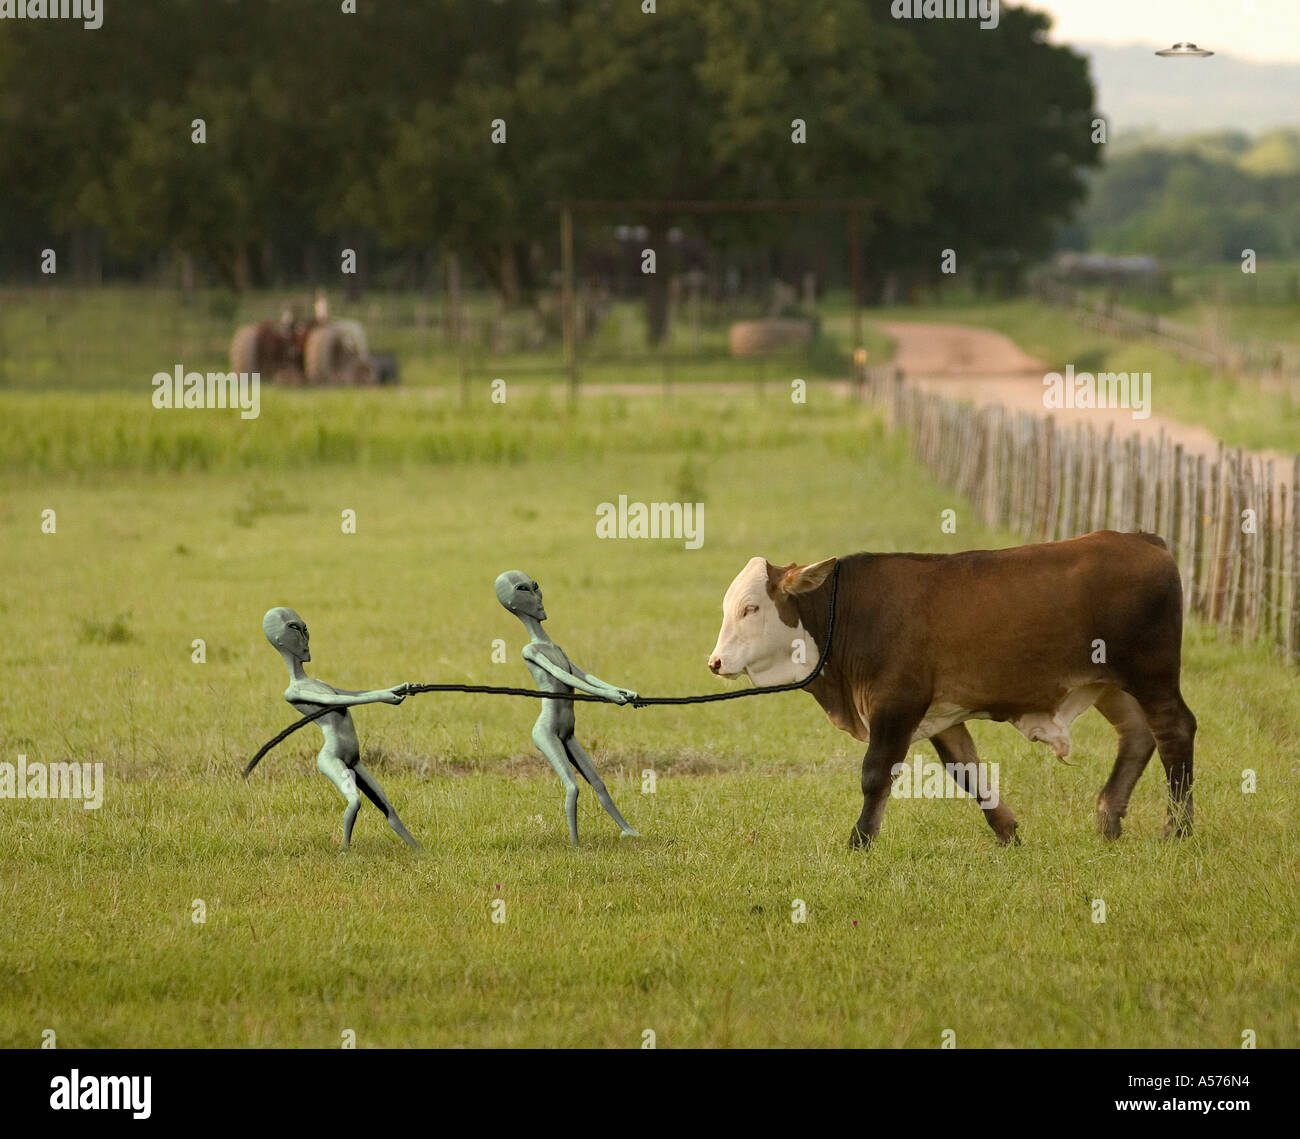 Aliens abducting a cow. Stock Photo